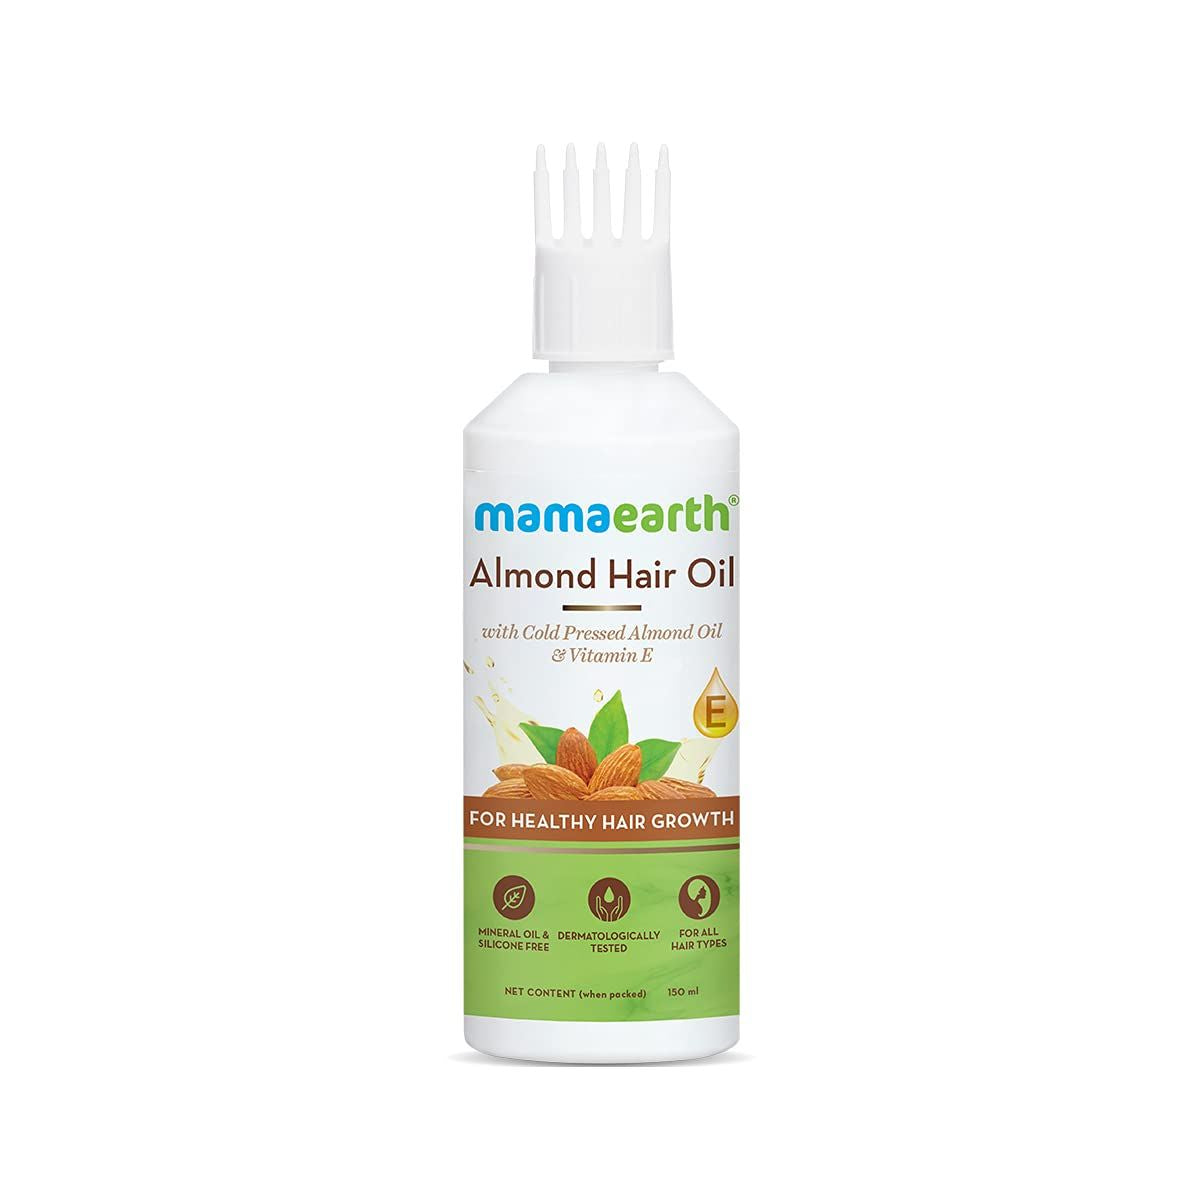 Almond Hair Oil with Cold Pressed Almond Oil & Vitamin E for Healthy Hair Growth - 150 ml